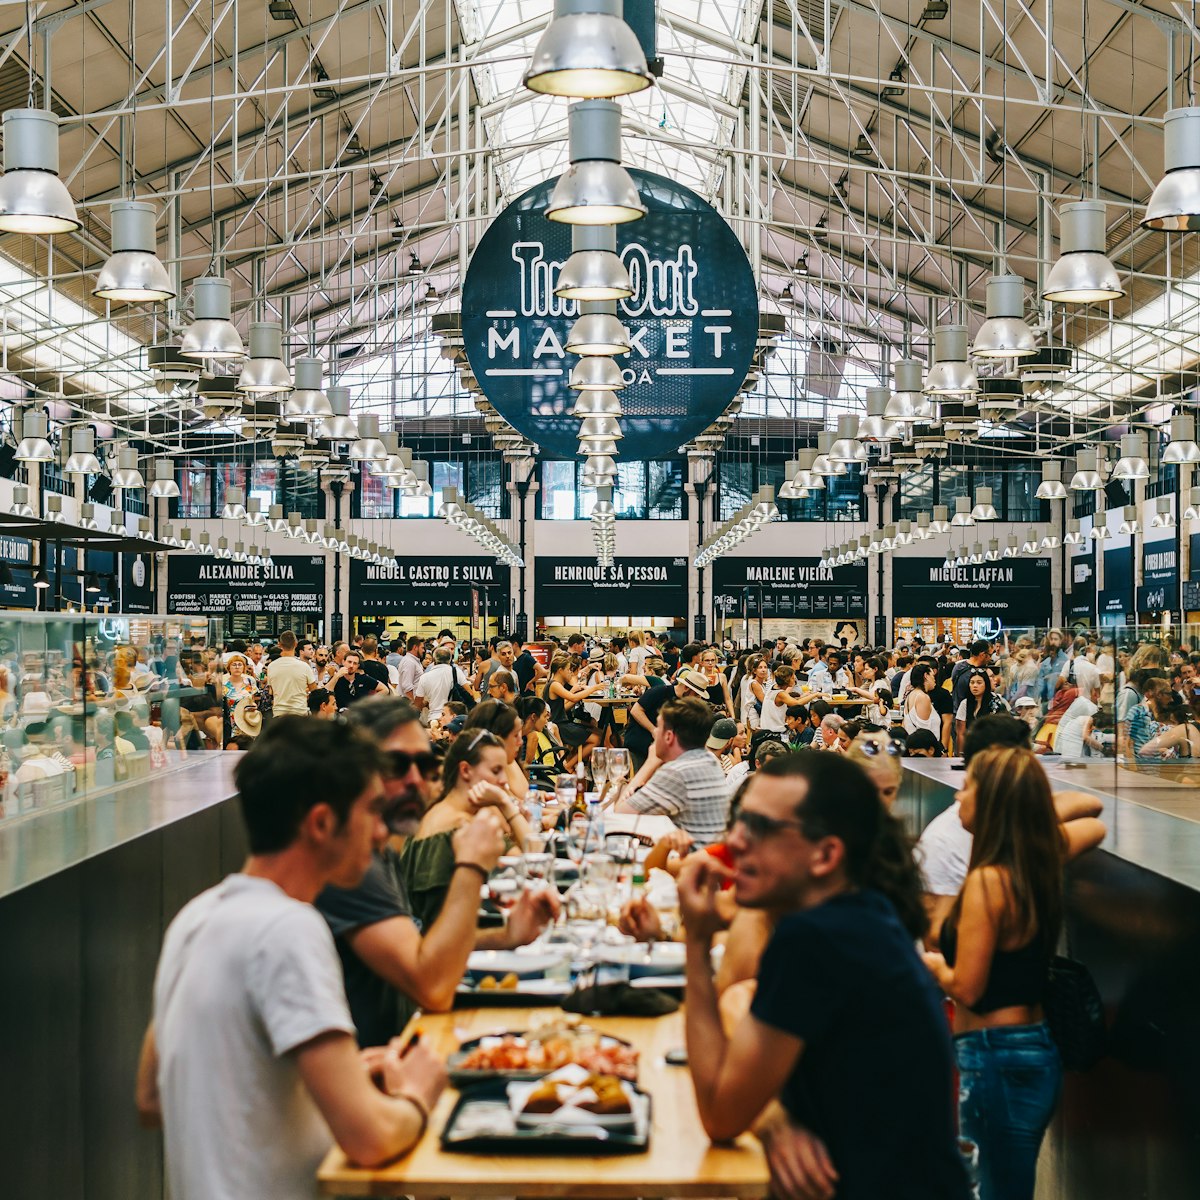 AUGUST 12, 2017: People dining inside the Time Out Market food hall in Mercado da Ribeira at Cais do Sodre.
735922567
architecture, attraction, building, business, cais, cais do sodre, city, crowd, cuisine, culture, eat, events, exposure, festival, food, food hall, food lover, food lovers, food shop, food store, fresh, hall, inside, interior, international, leisure, life, lisboa, lisbon, major, market, mercado, people, portugal, portuguese, restaurant, ribeira, shop, sodre, store, tasting, time, time out, tourist, touristic, traditional, travel, urban